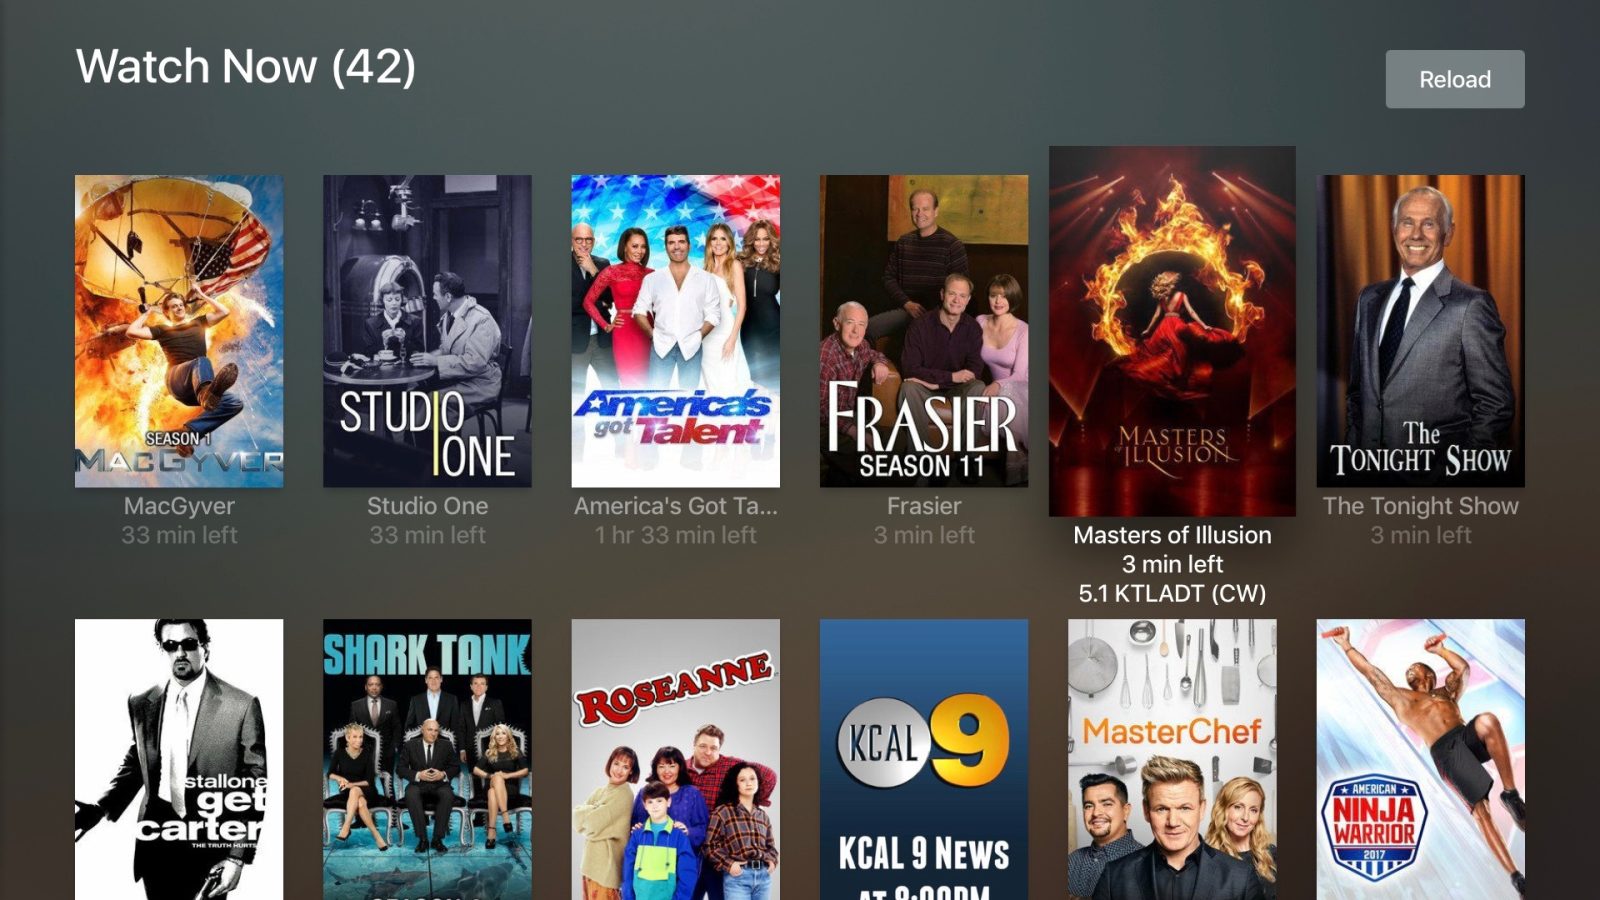 44 HQ Pictures 9 News Apple Tv - Abc News On Apple Tv 5 Things To Know Abc News